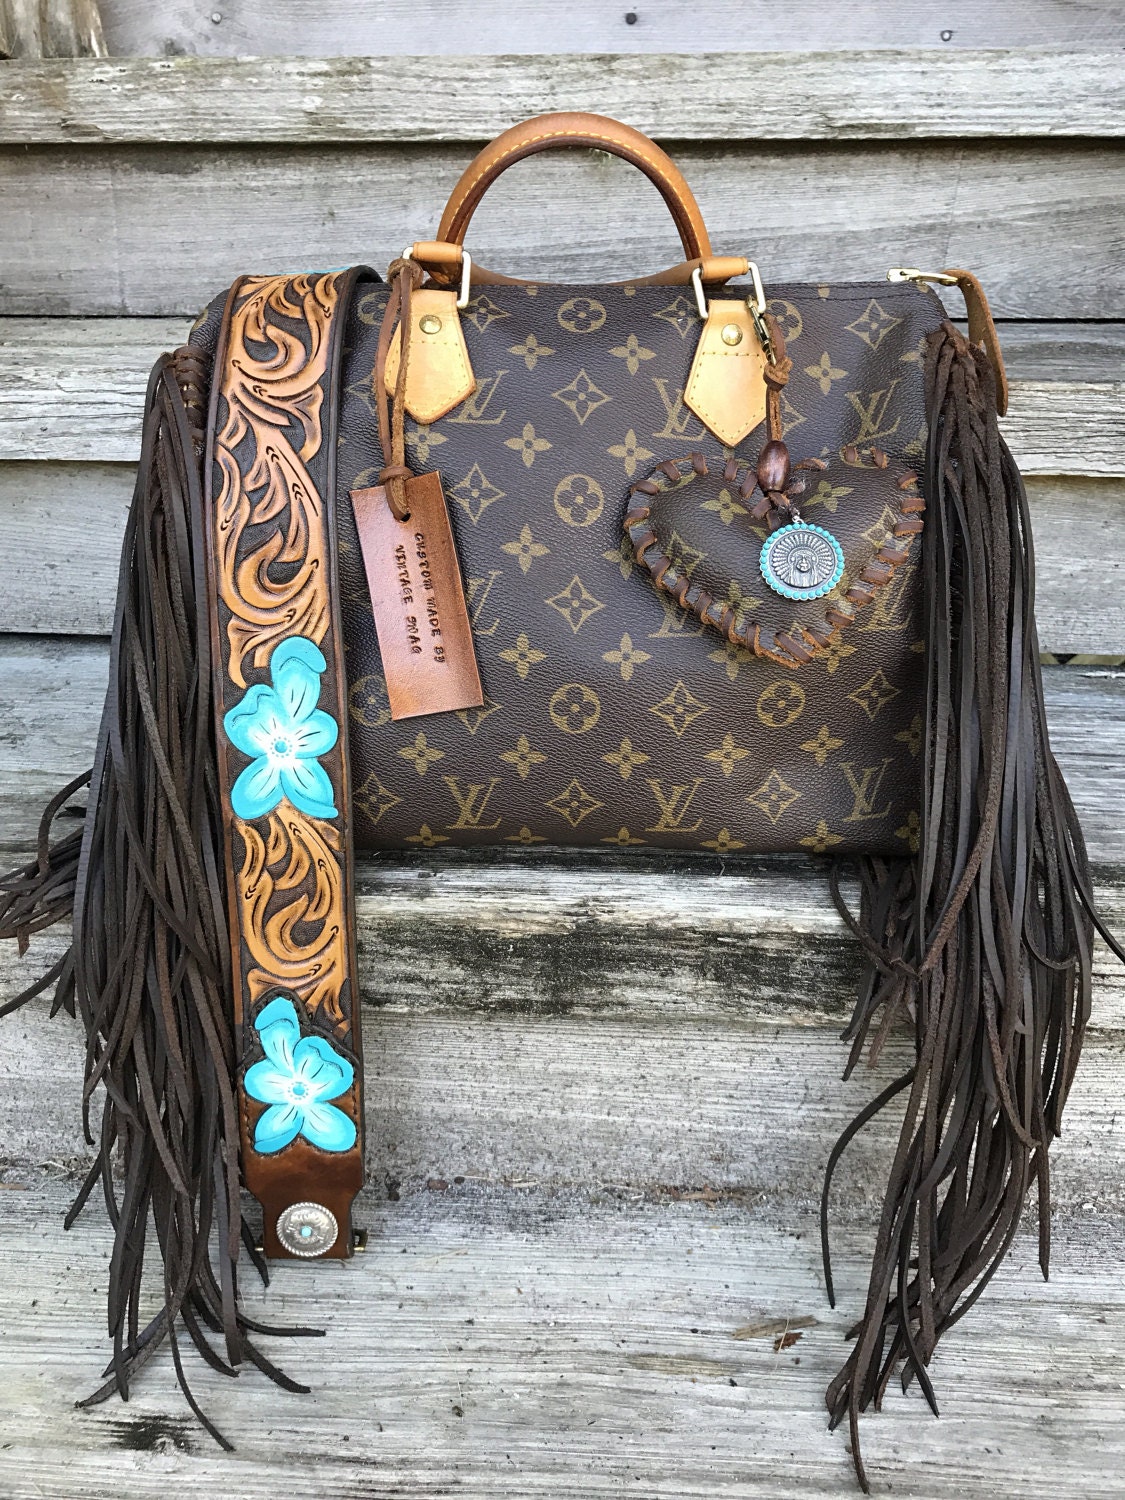 Repurposed Louis Vuitton Bags With Fringe | IQS Executive